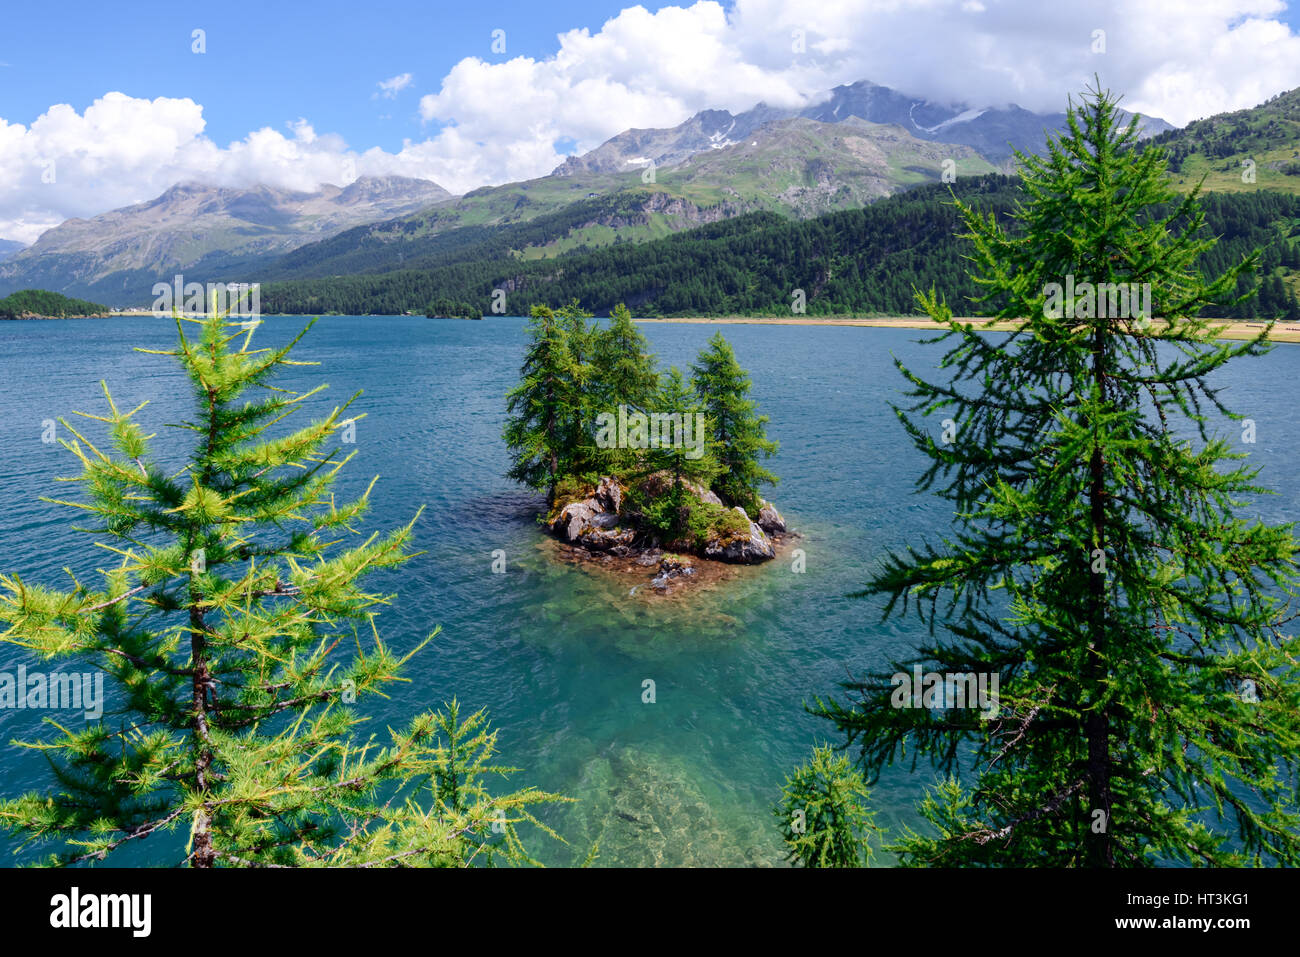 Amazing sunny day at Silsersee lake in the Swiss Alps. Segl, Switzerland, Europe. Stock Photo